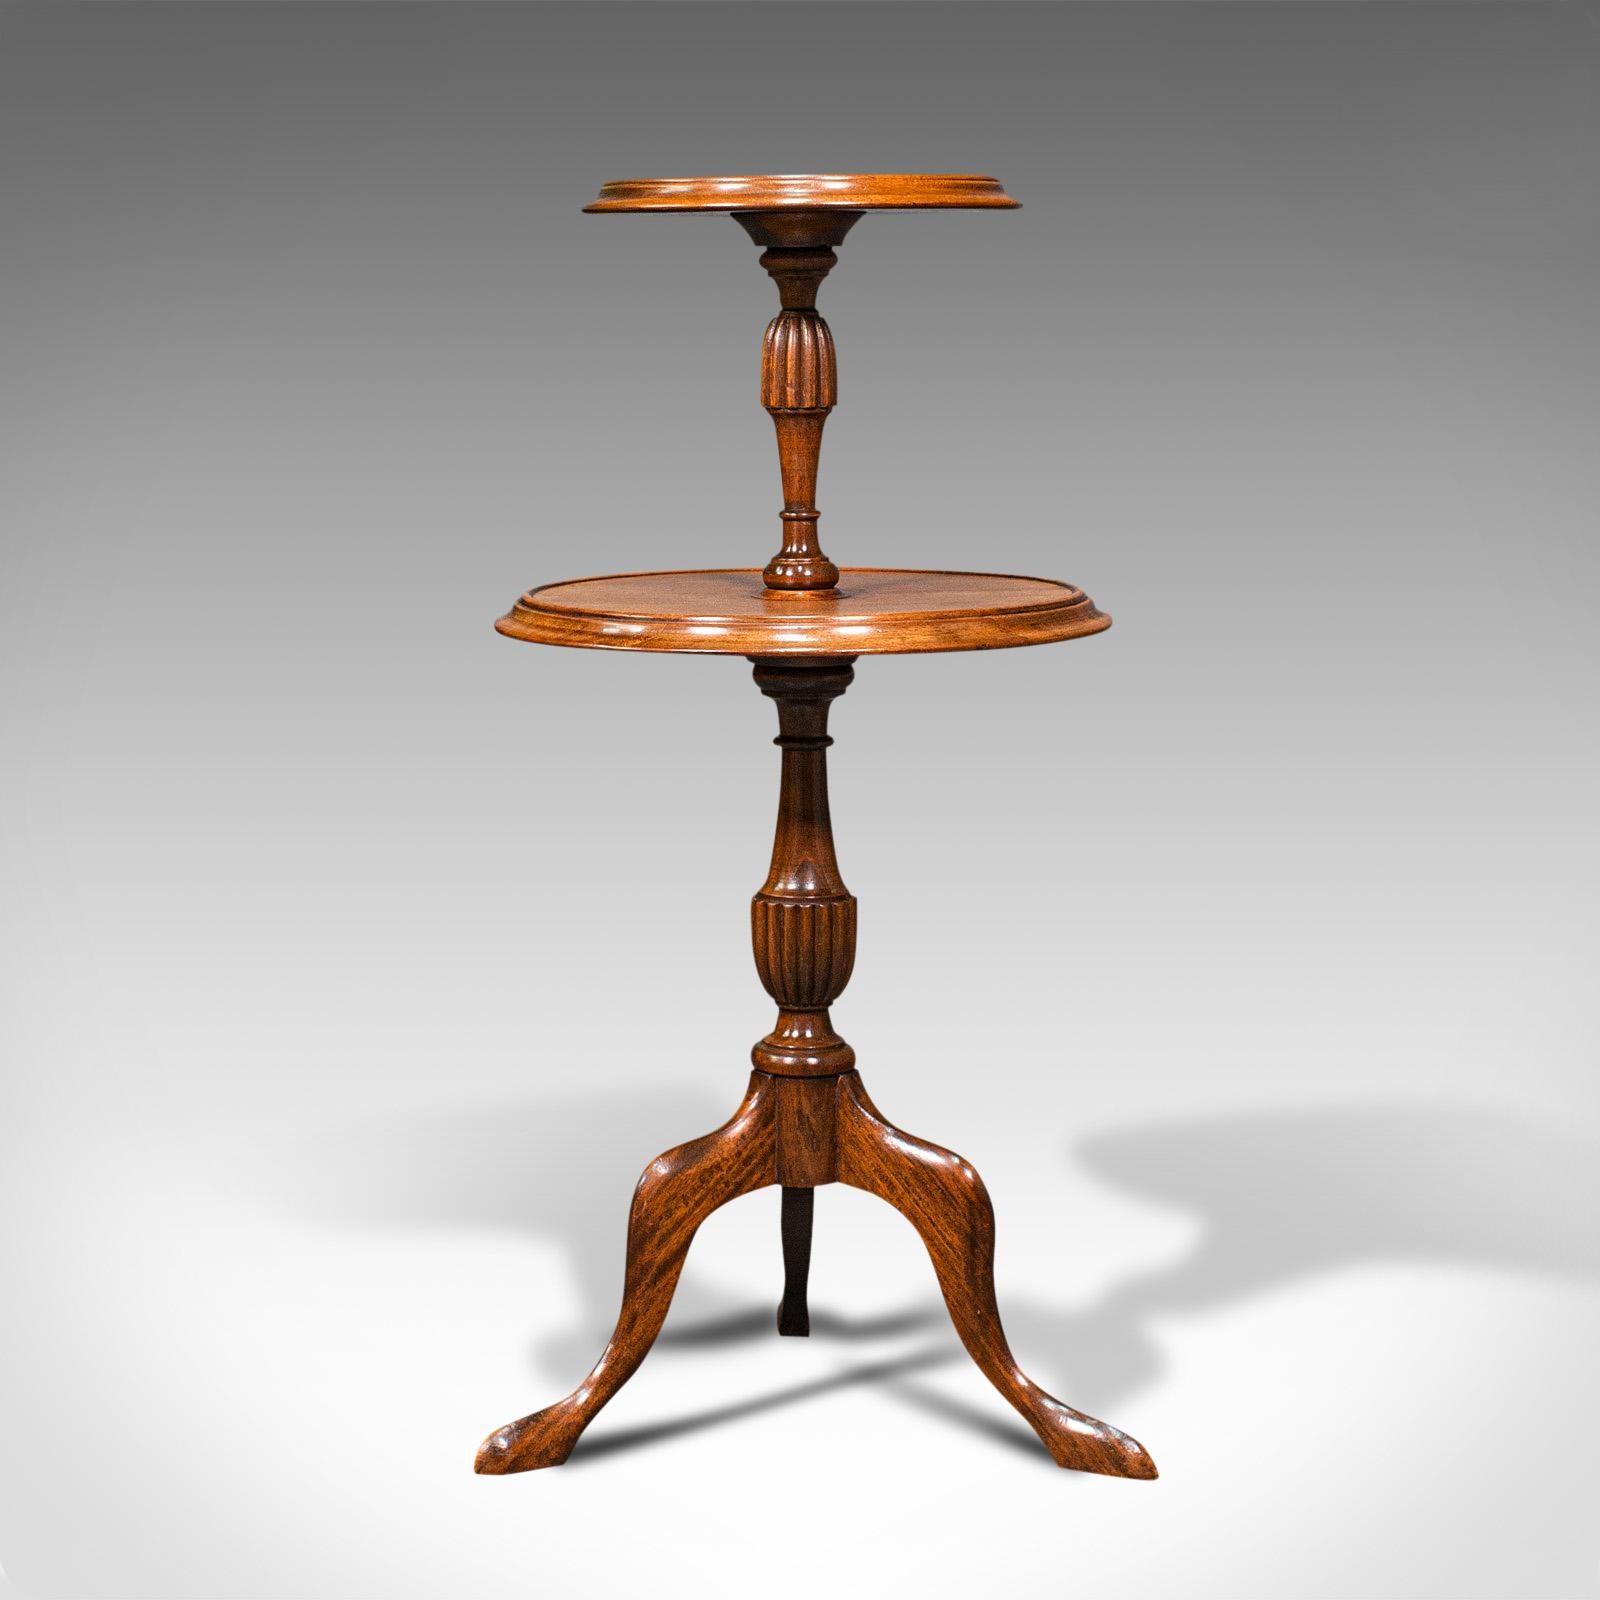 This is an antique two tiered table. An English, mahogany afternoon tea or cake stand, dating to the Edwardian period, circa 1910.

Elegantly serve afternoon tea with this Edwardian stand
Displaying a desirable aged patina throughout
Select